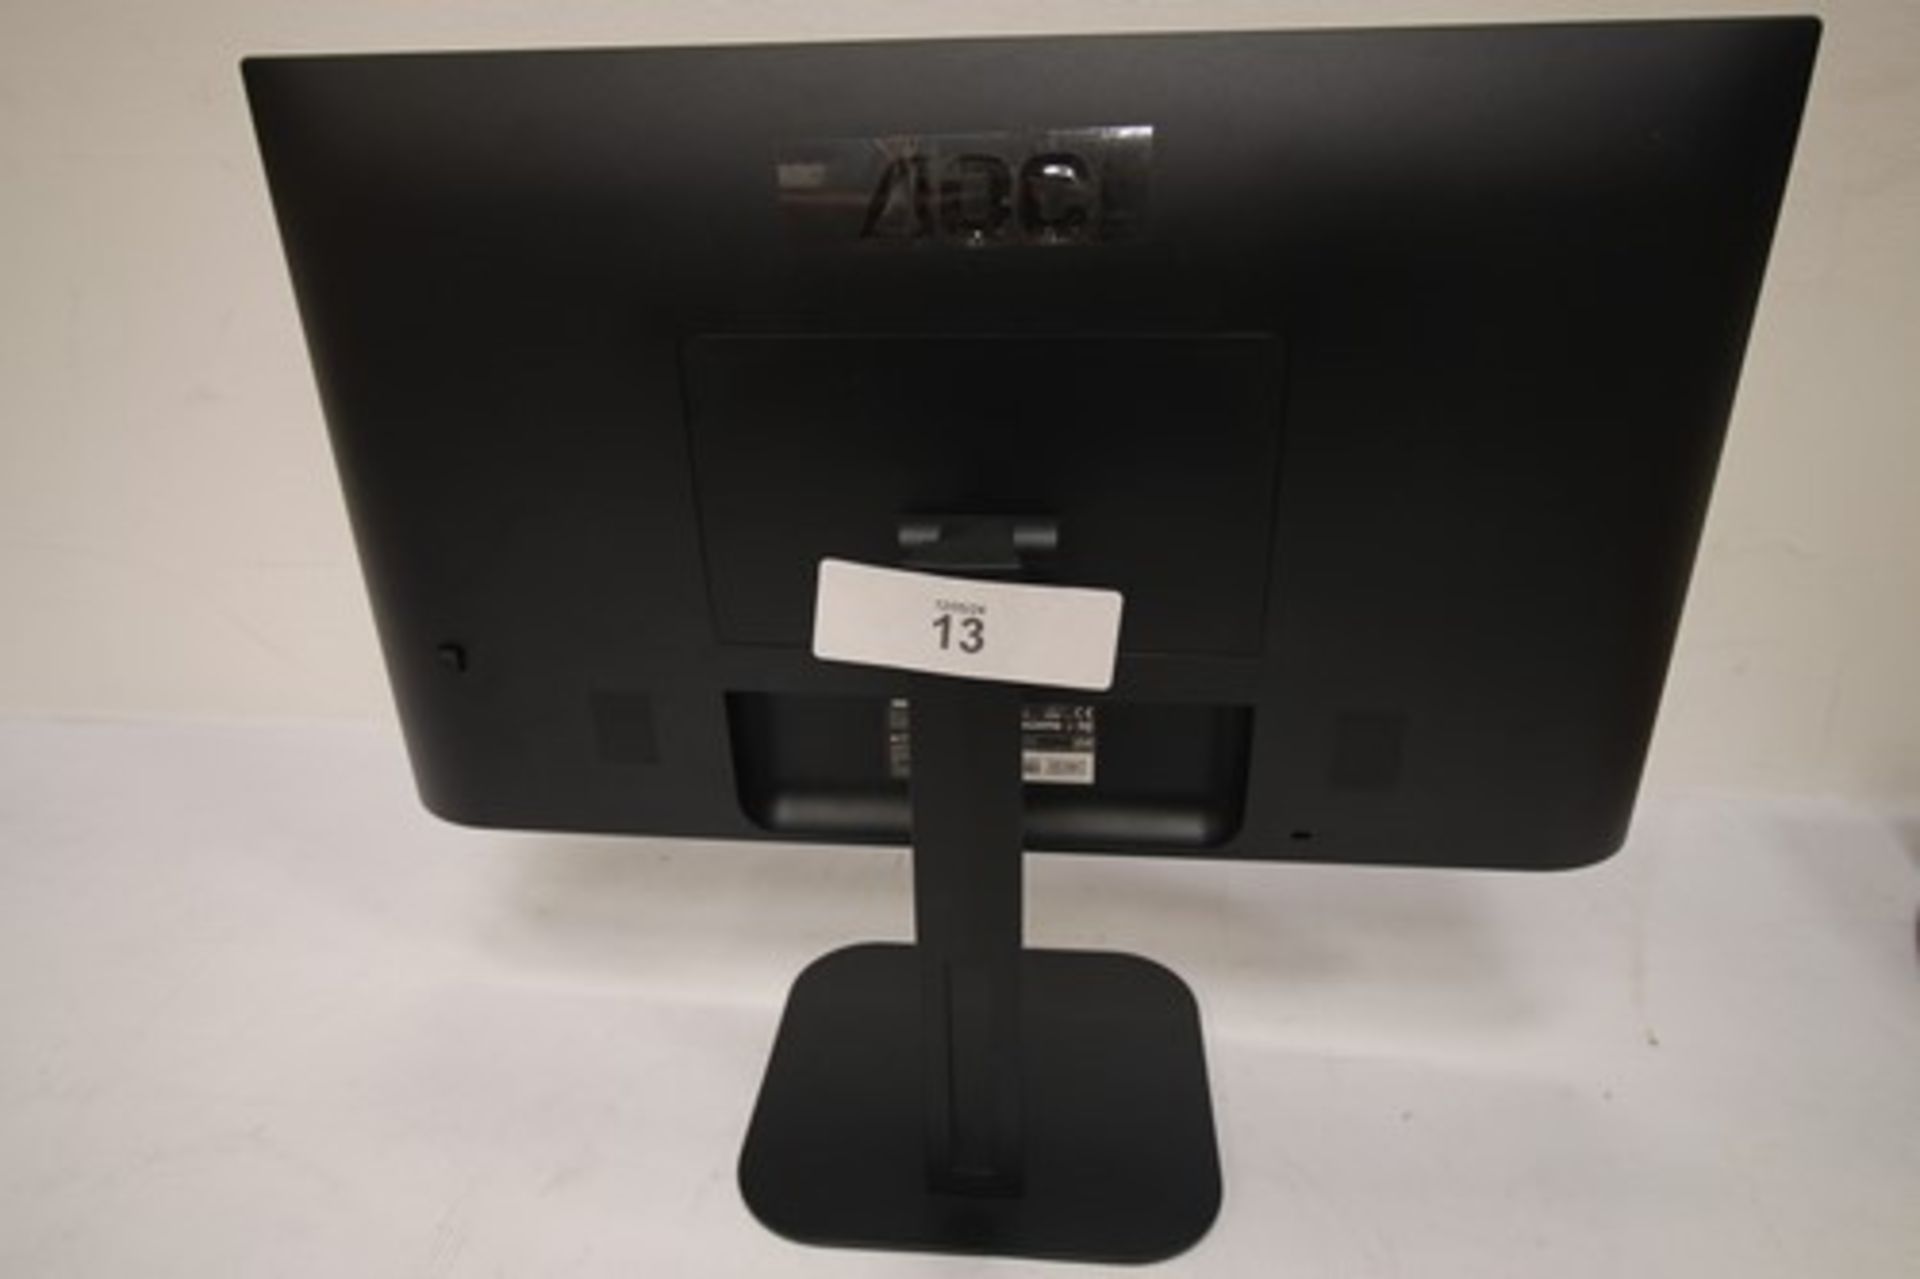 1 x AOC 23.8" wide screen monitor, model No: 24V5CE/BK - new in box (ES3 cage) - Image 2 of 4